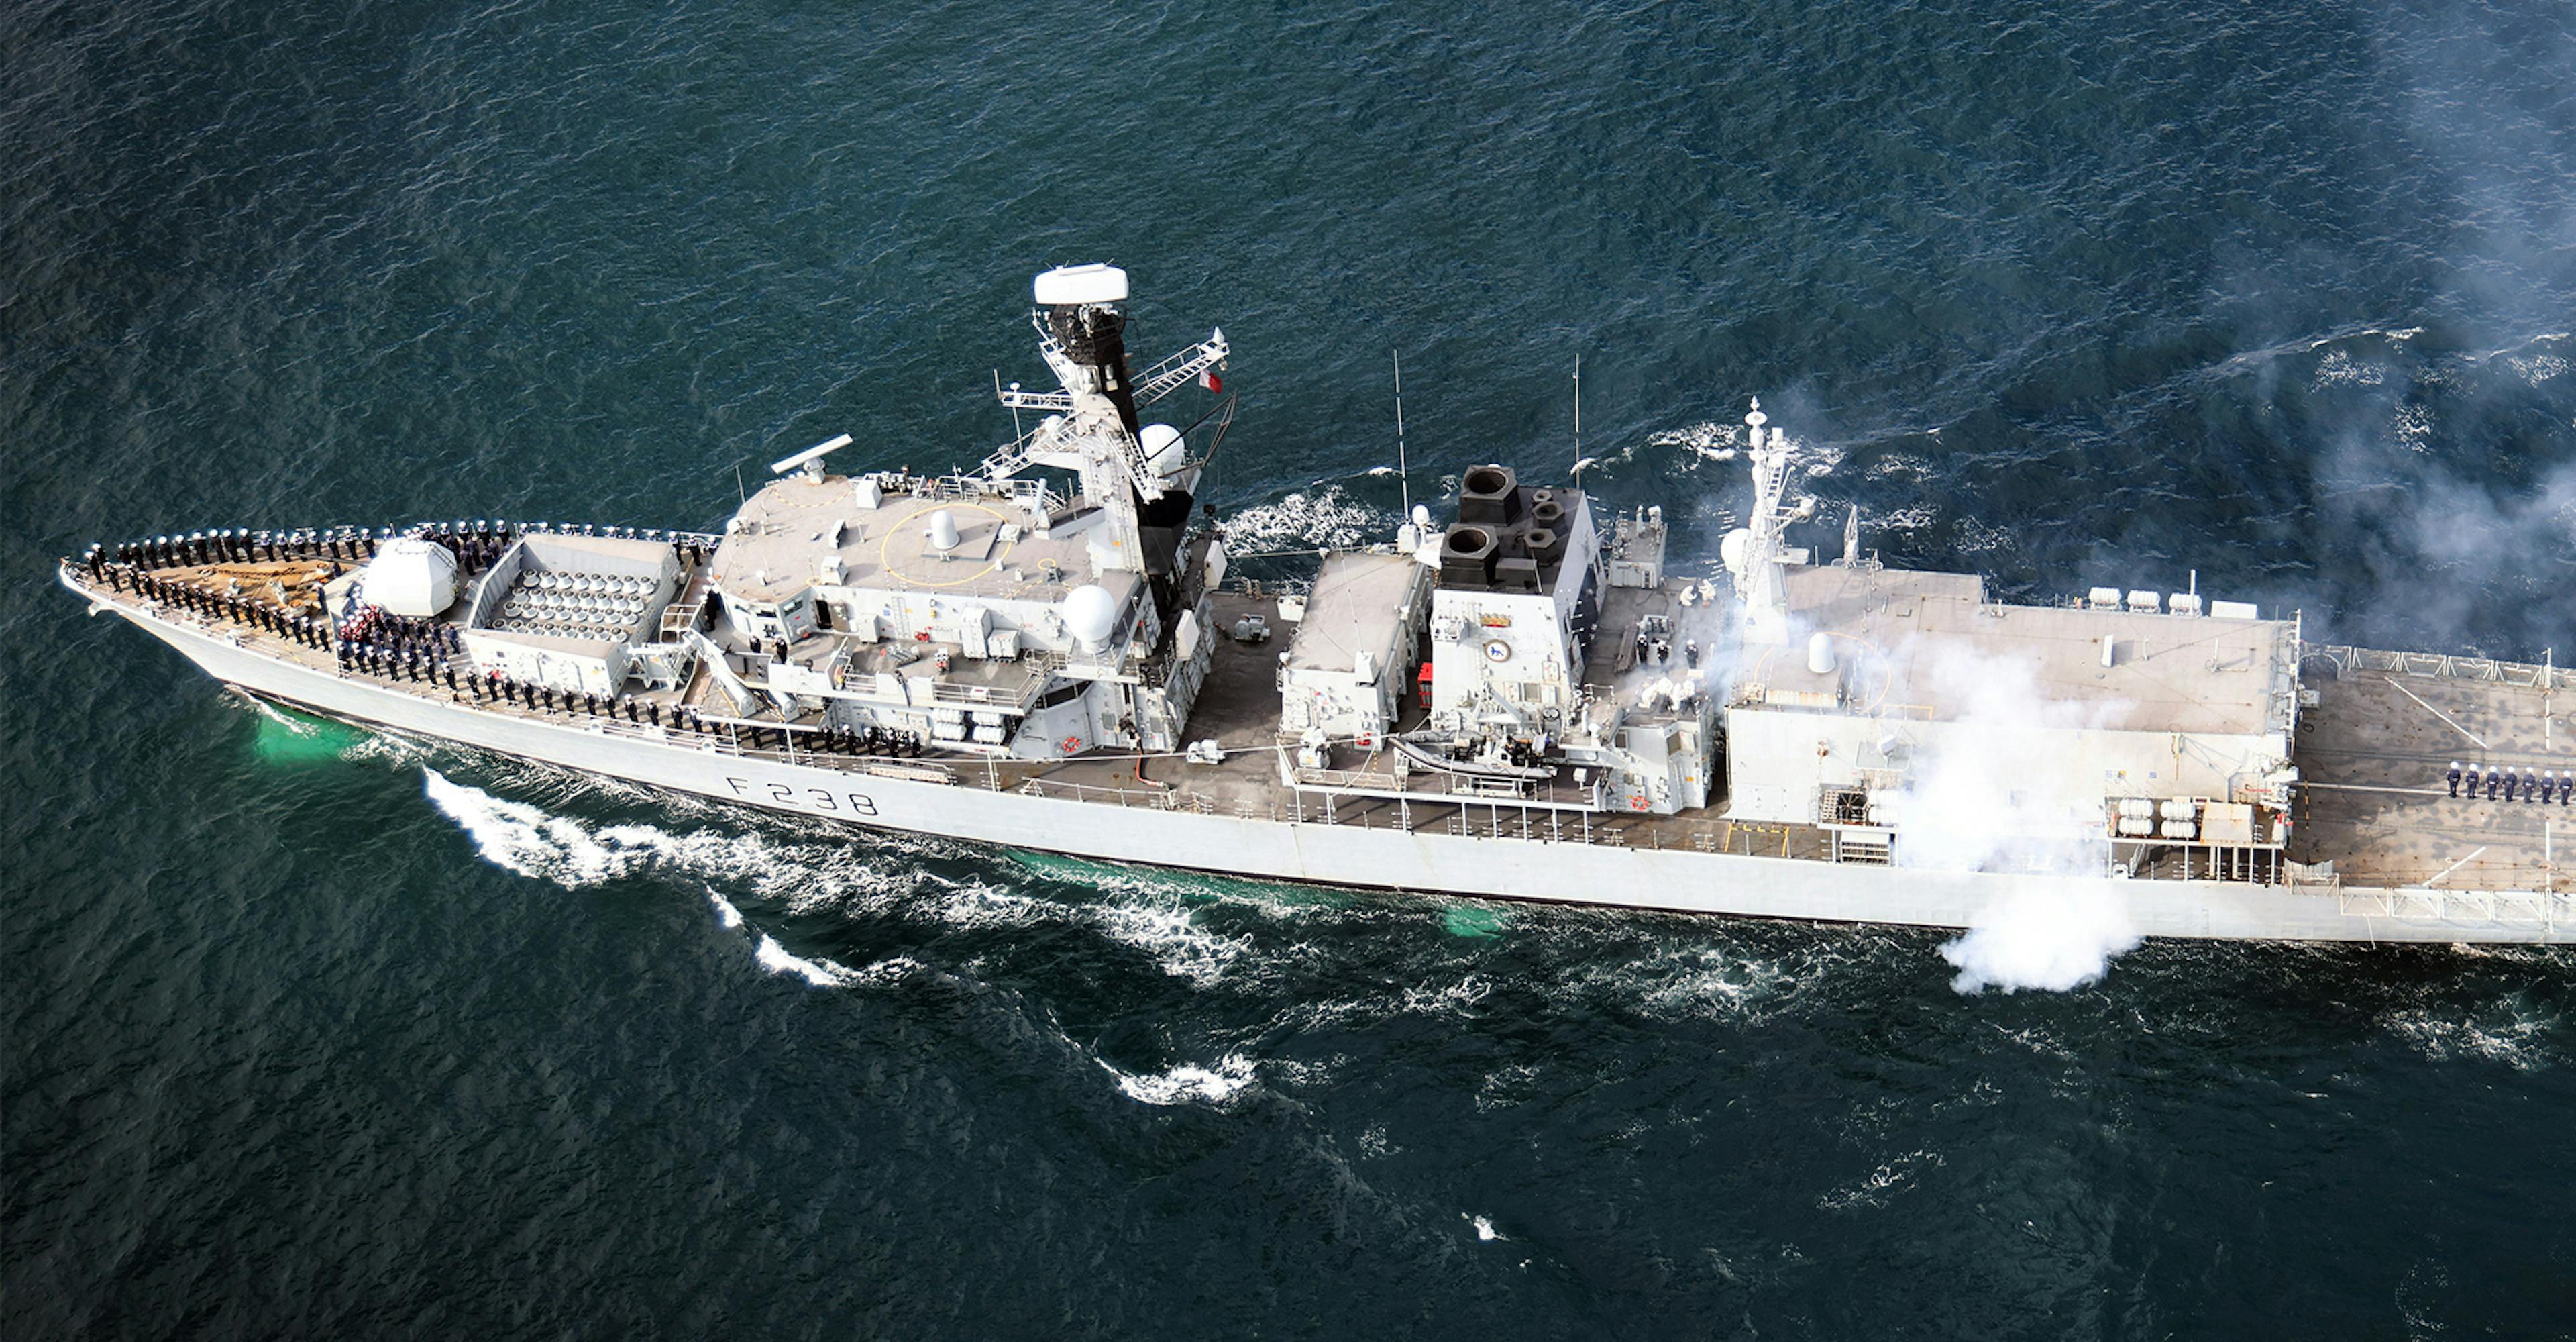 An aerial view of a navy ship sailing gracefully on the water, showcasing its strength and power.